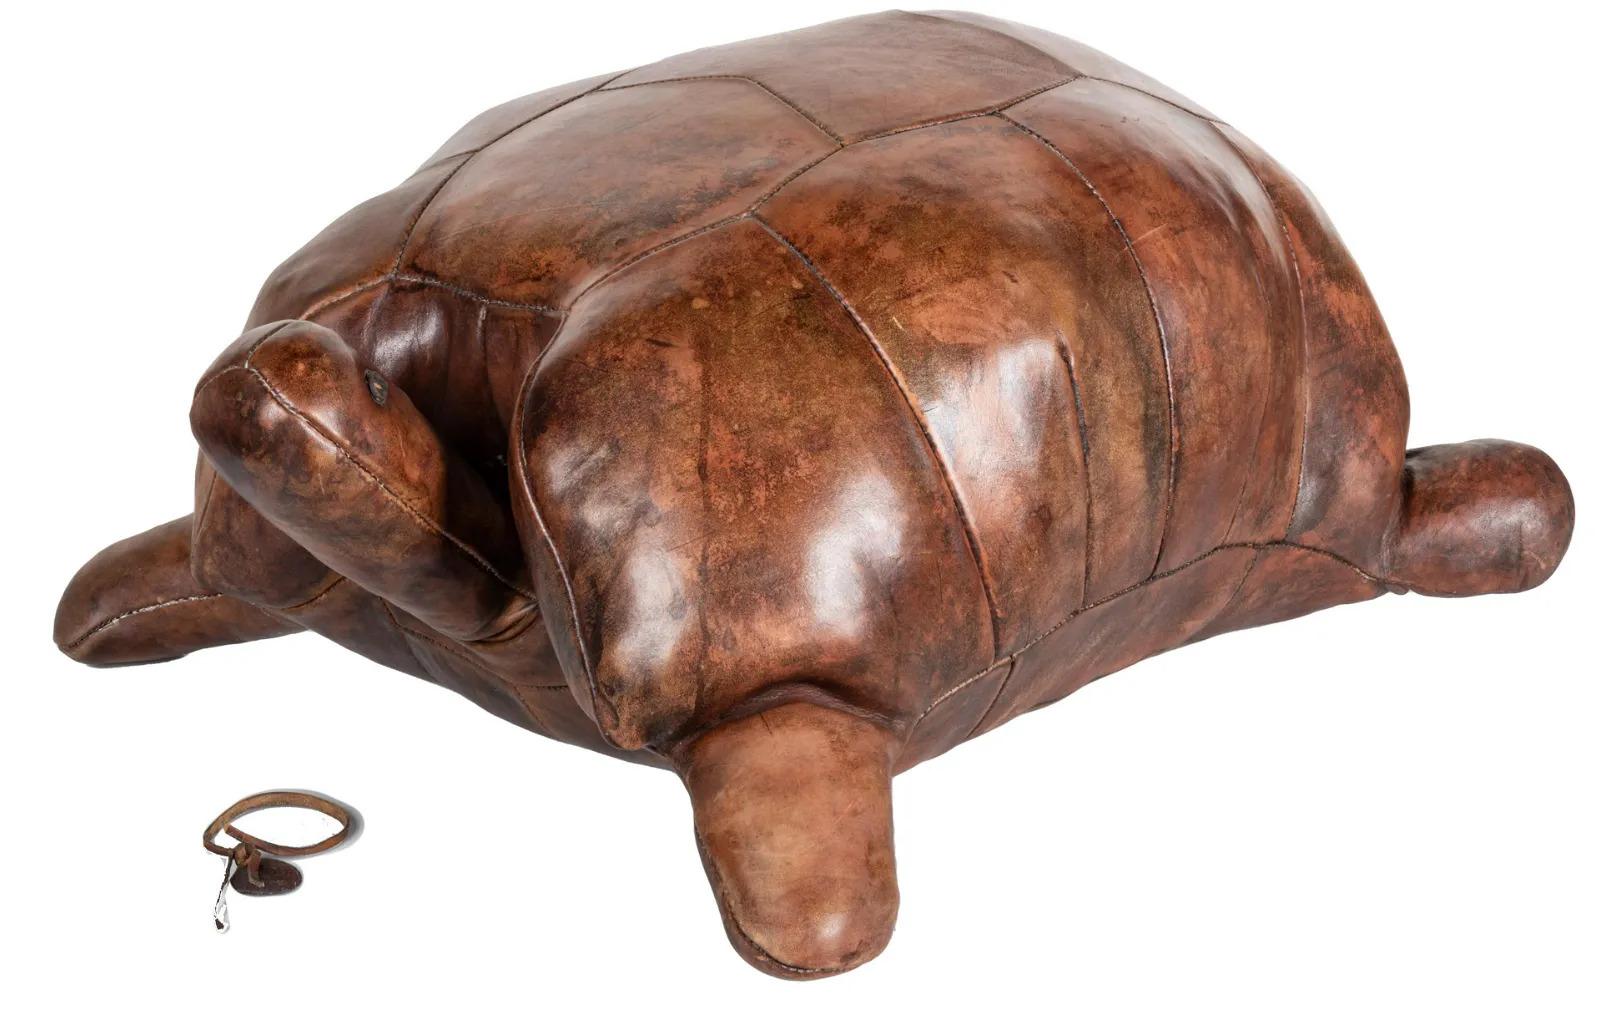 Leather Turtle Footstool or Ottoman,
Dimitri Omersa,
1970s

The large realistic leather model of a turtle, designed as a footstool or ottoman by Dimitri Omersa with leather tag.

Dimensions: 12 inches high x 22 inches deep x 28